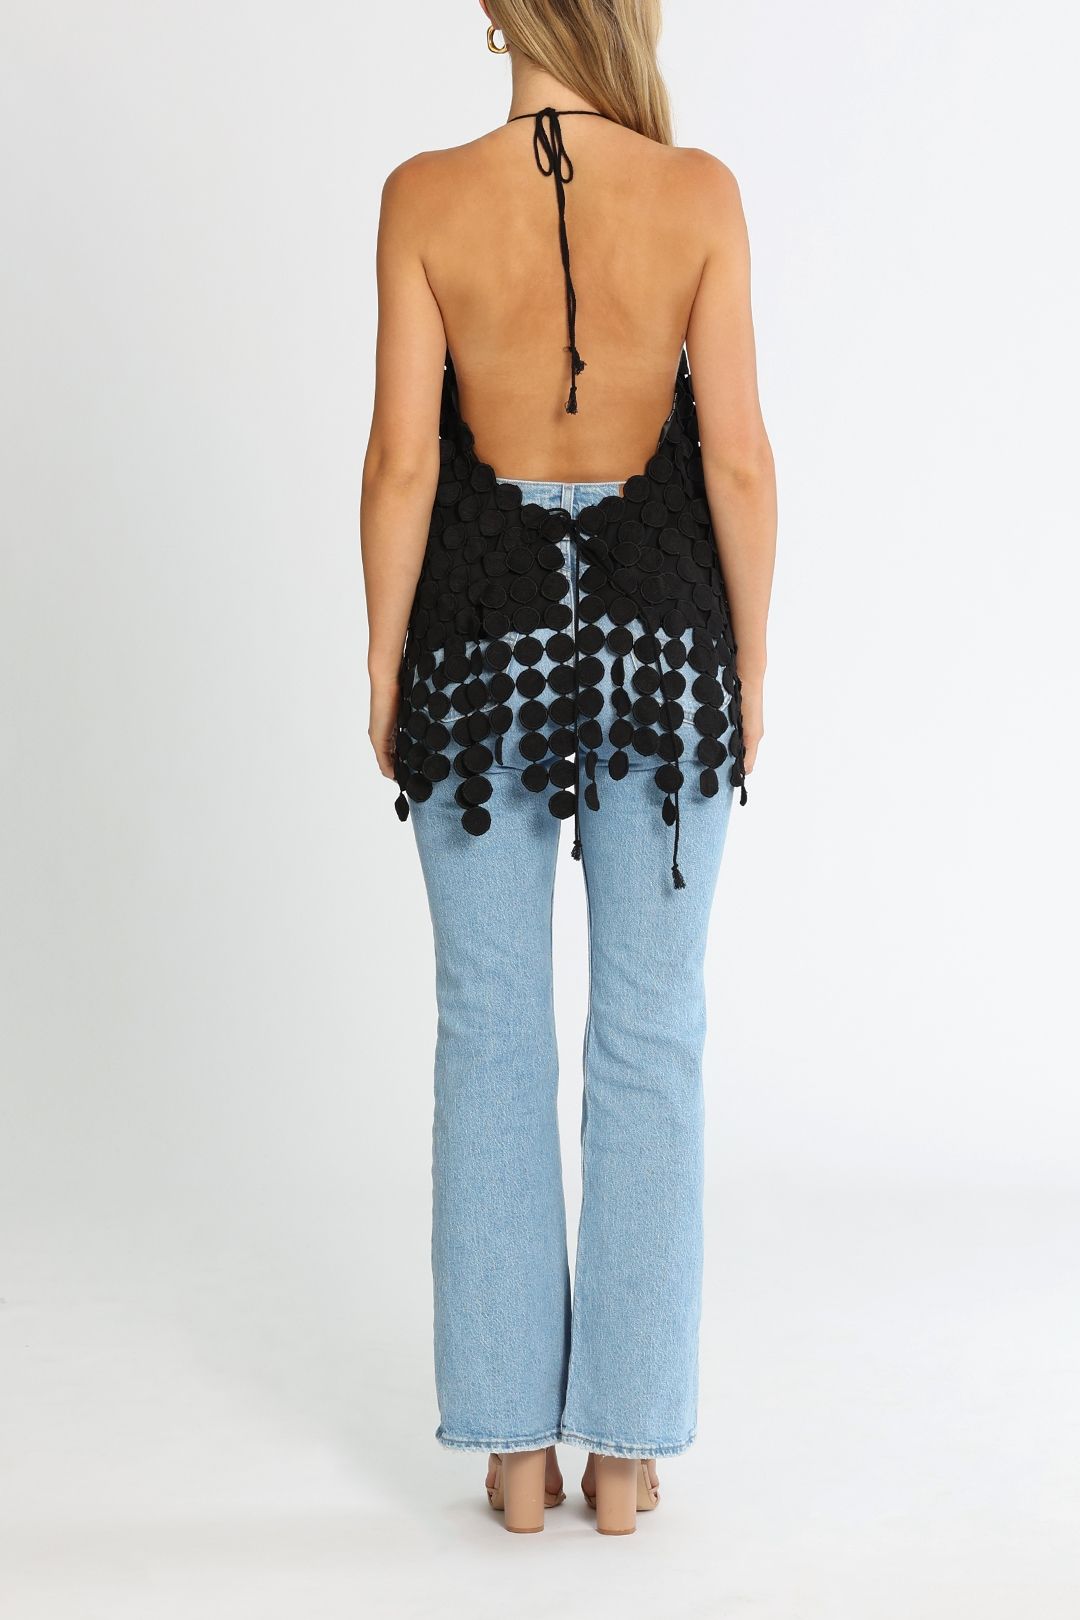 Camilla and Marc Murano Top Black Backless